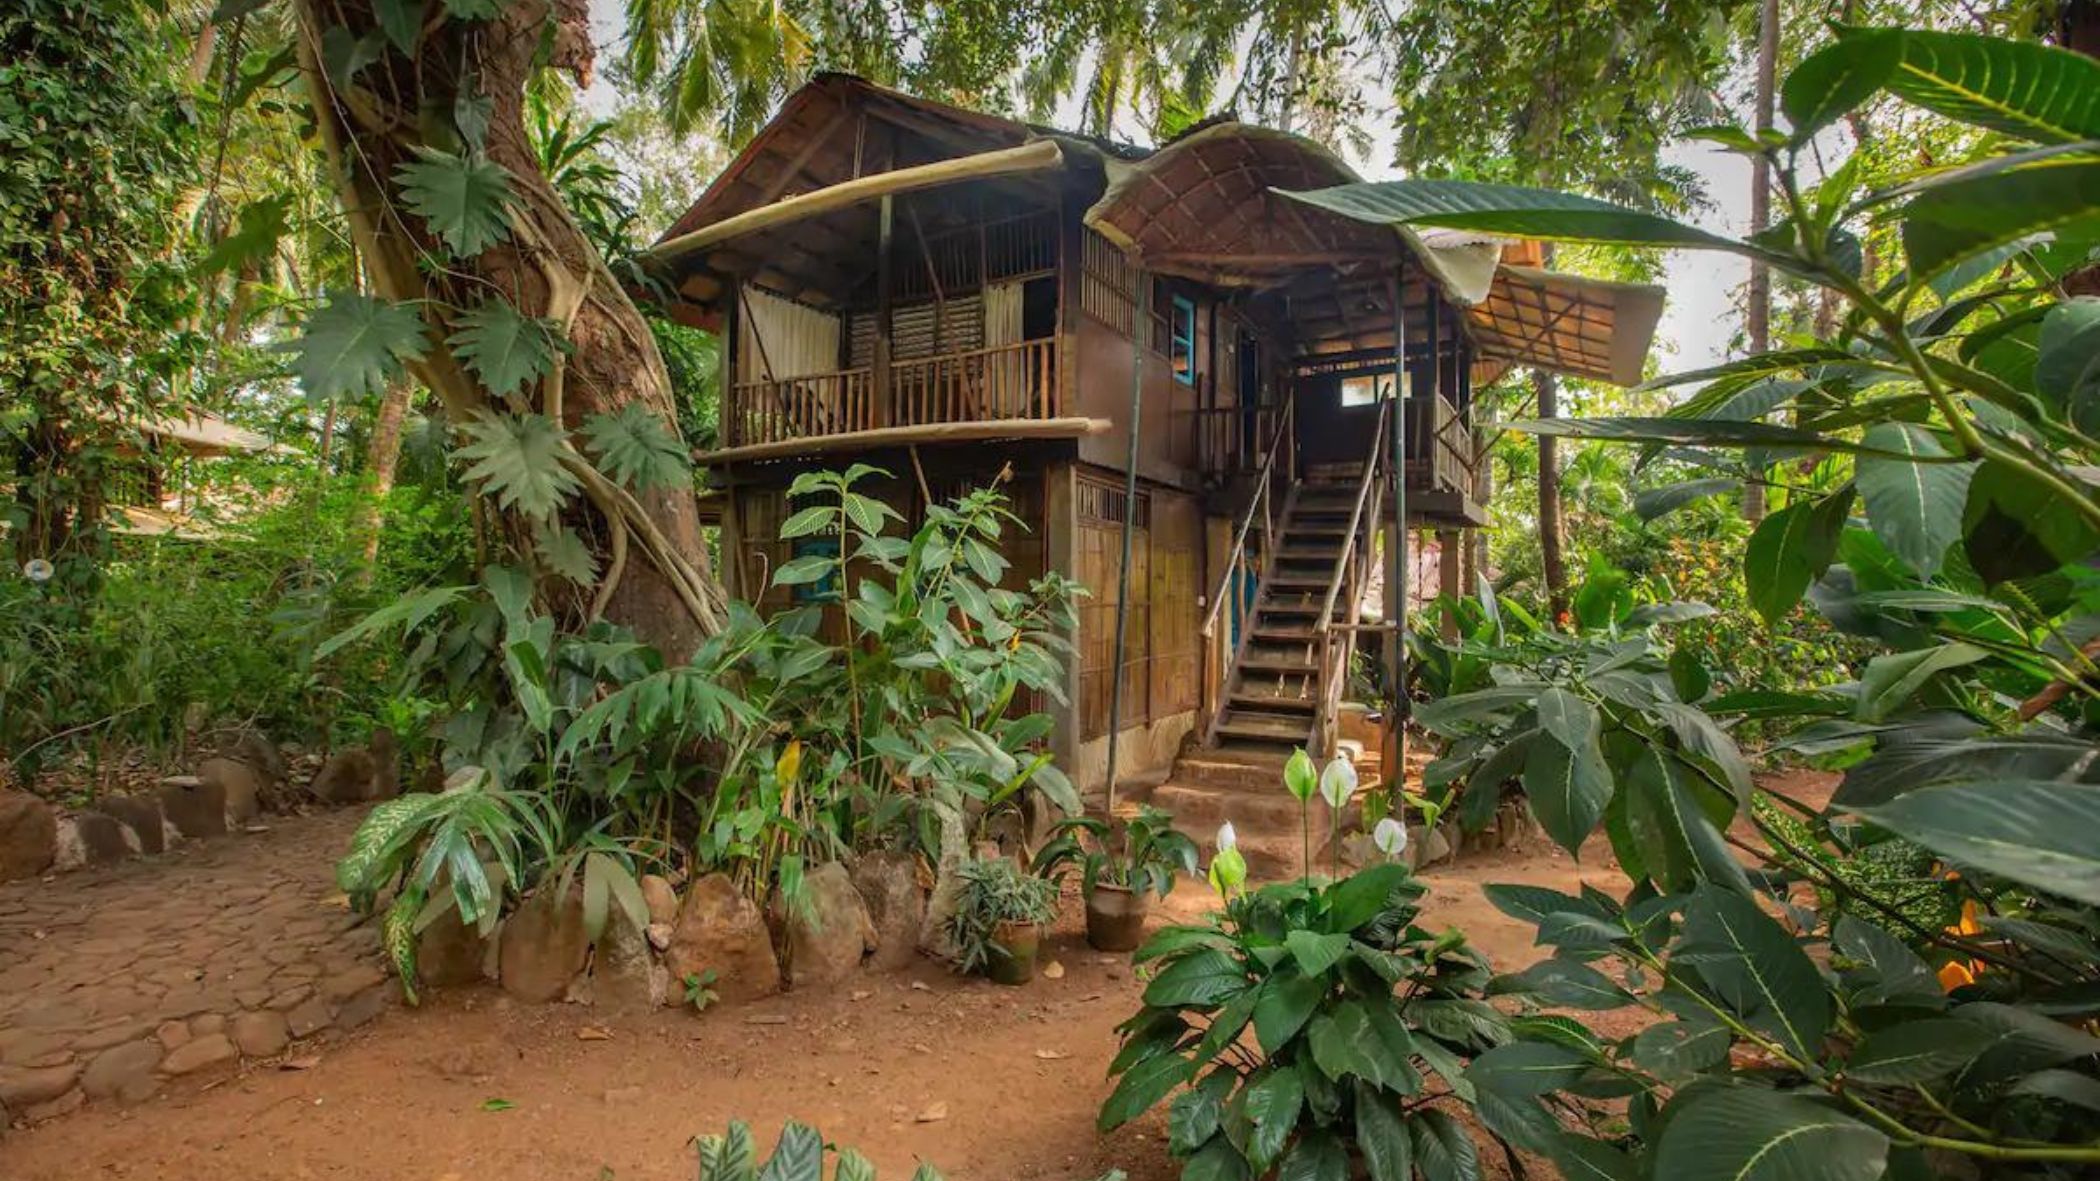 This Jungle Cabana In Goa Is Perfect For Relaxation & Offers Yoga Sessions, Ayurvedic Spa & More!